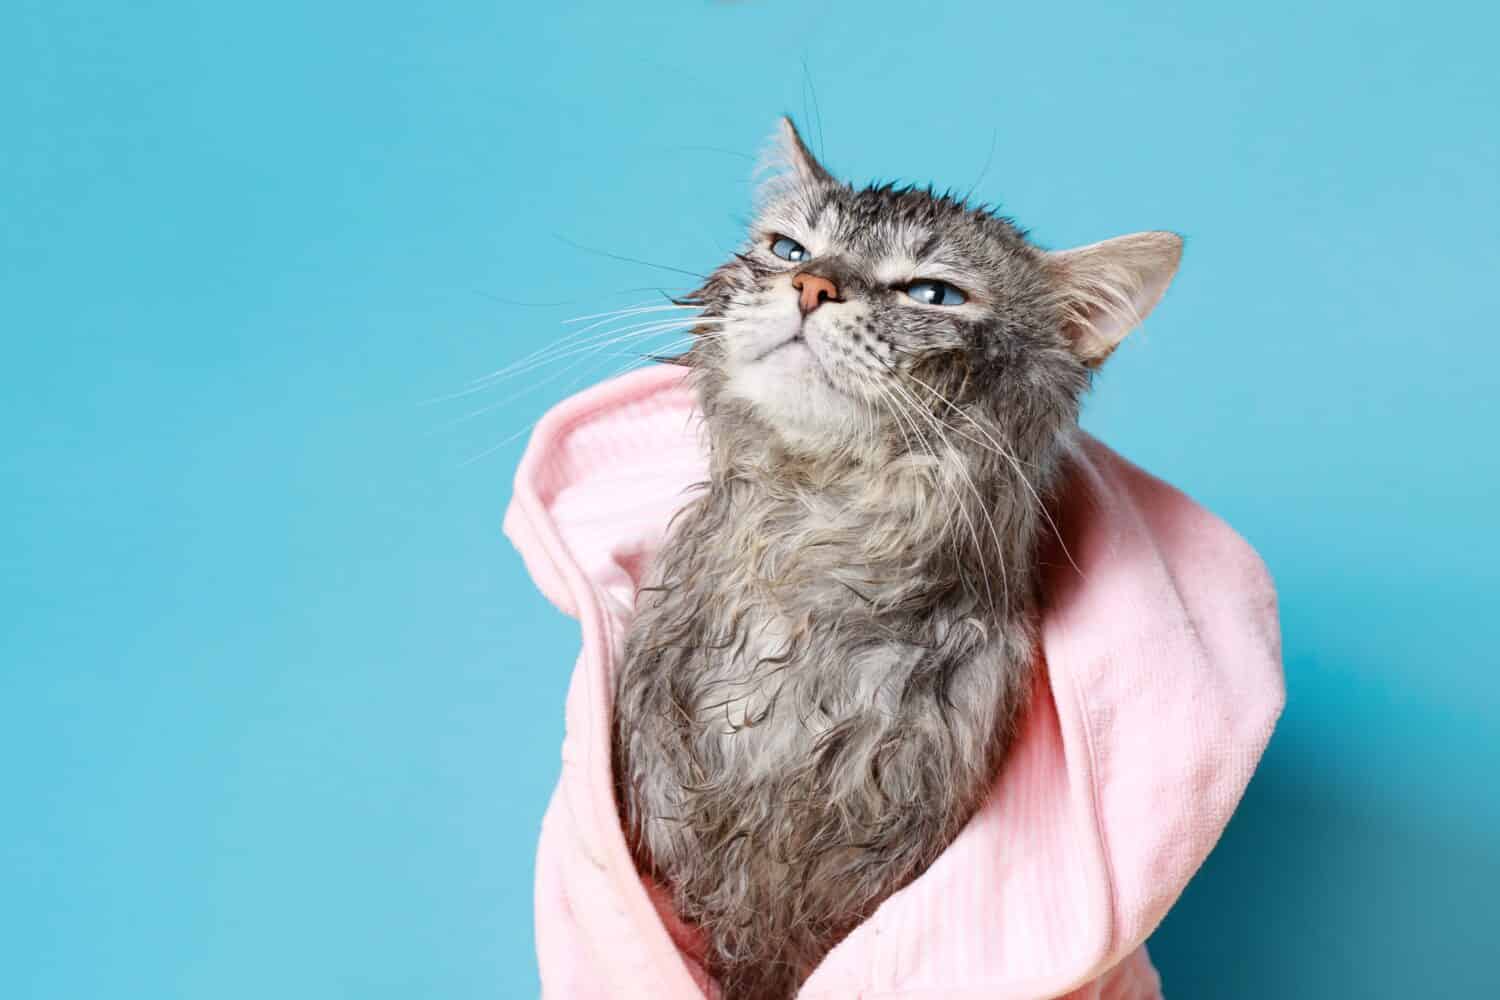 Funny wet gray tabby kitten after bath in pink in bathrobe . Just washed lovely fluffy cat on blue background. Cat on horizontal banner with copy space for popular social media website cover image.